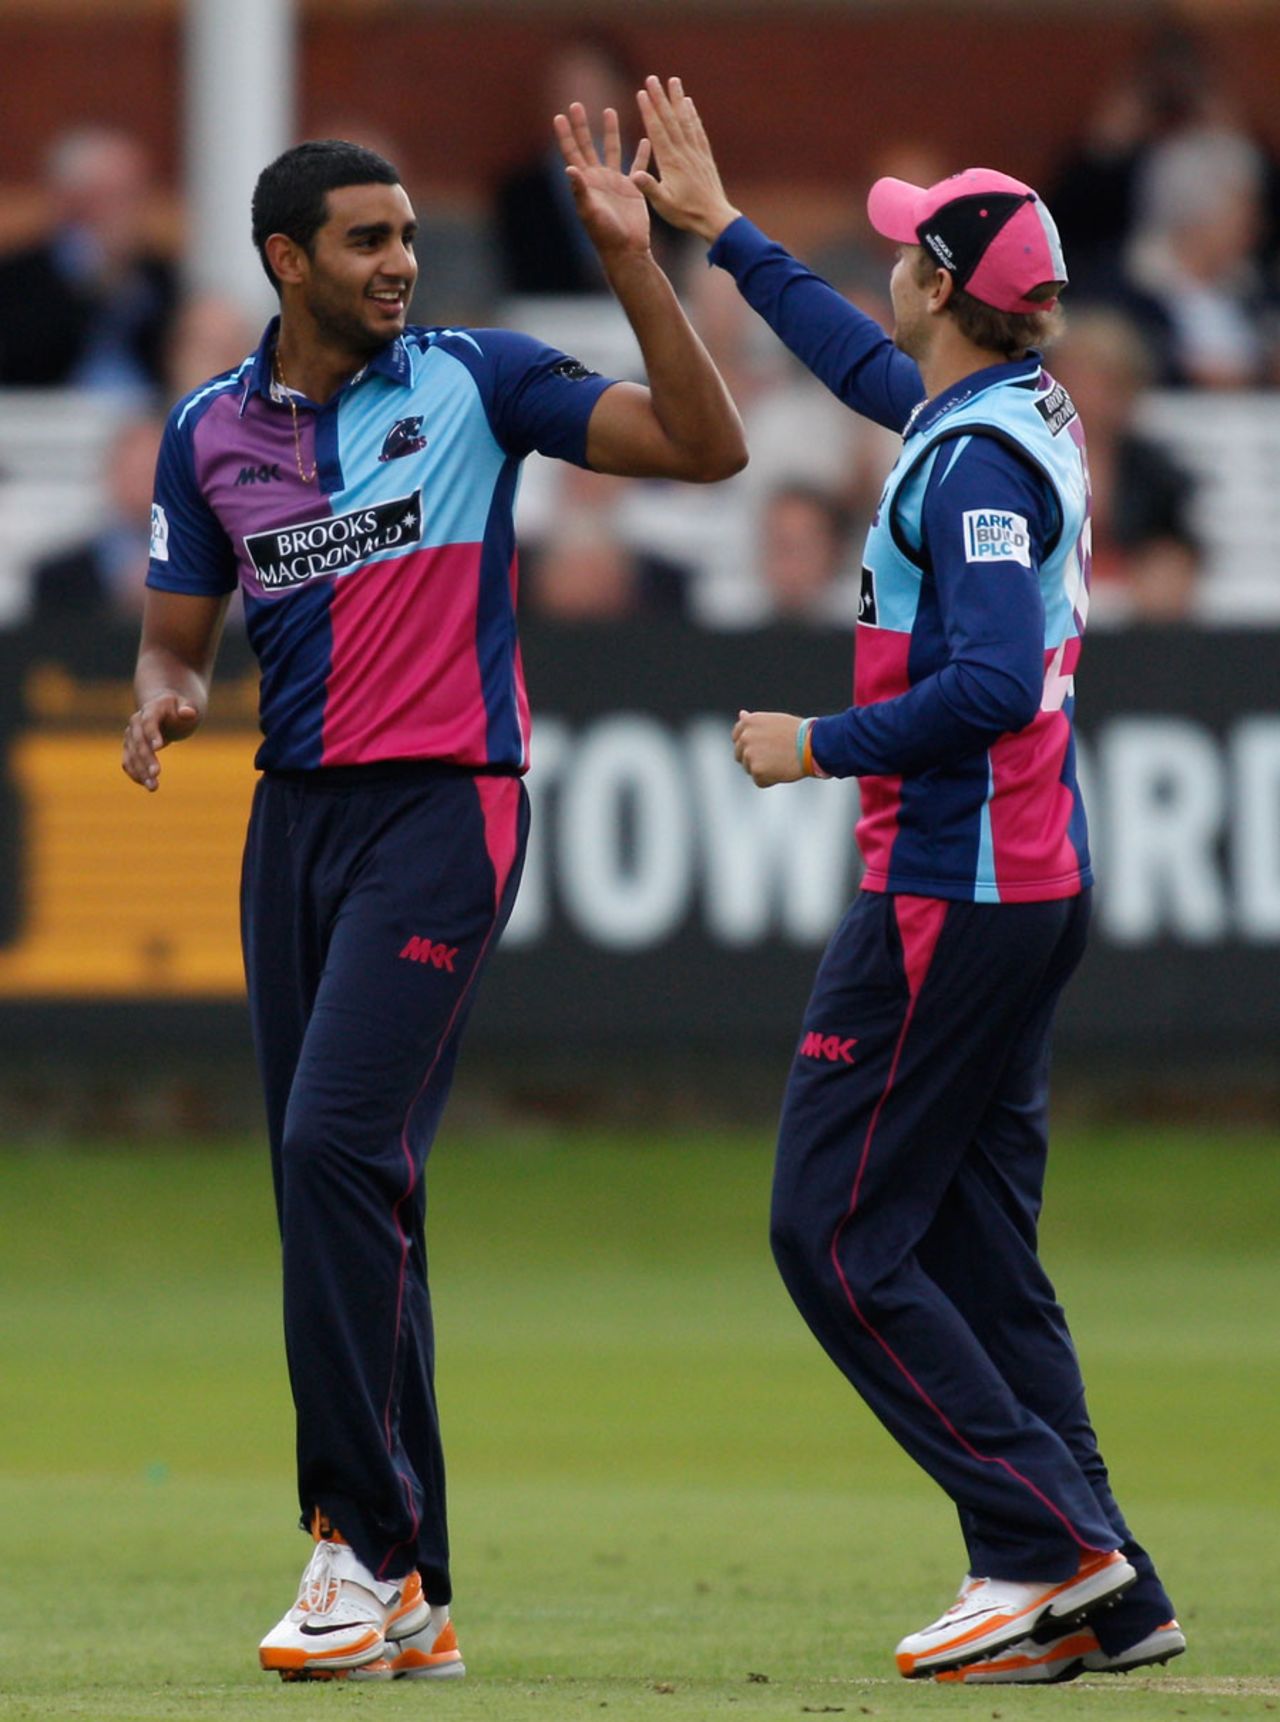 Gurjit Sandhu took three wickets on his limited-overs debut, Middlesex v Essex, CB40 Group A, Lord's, August 27, 2012